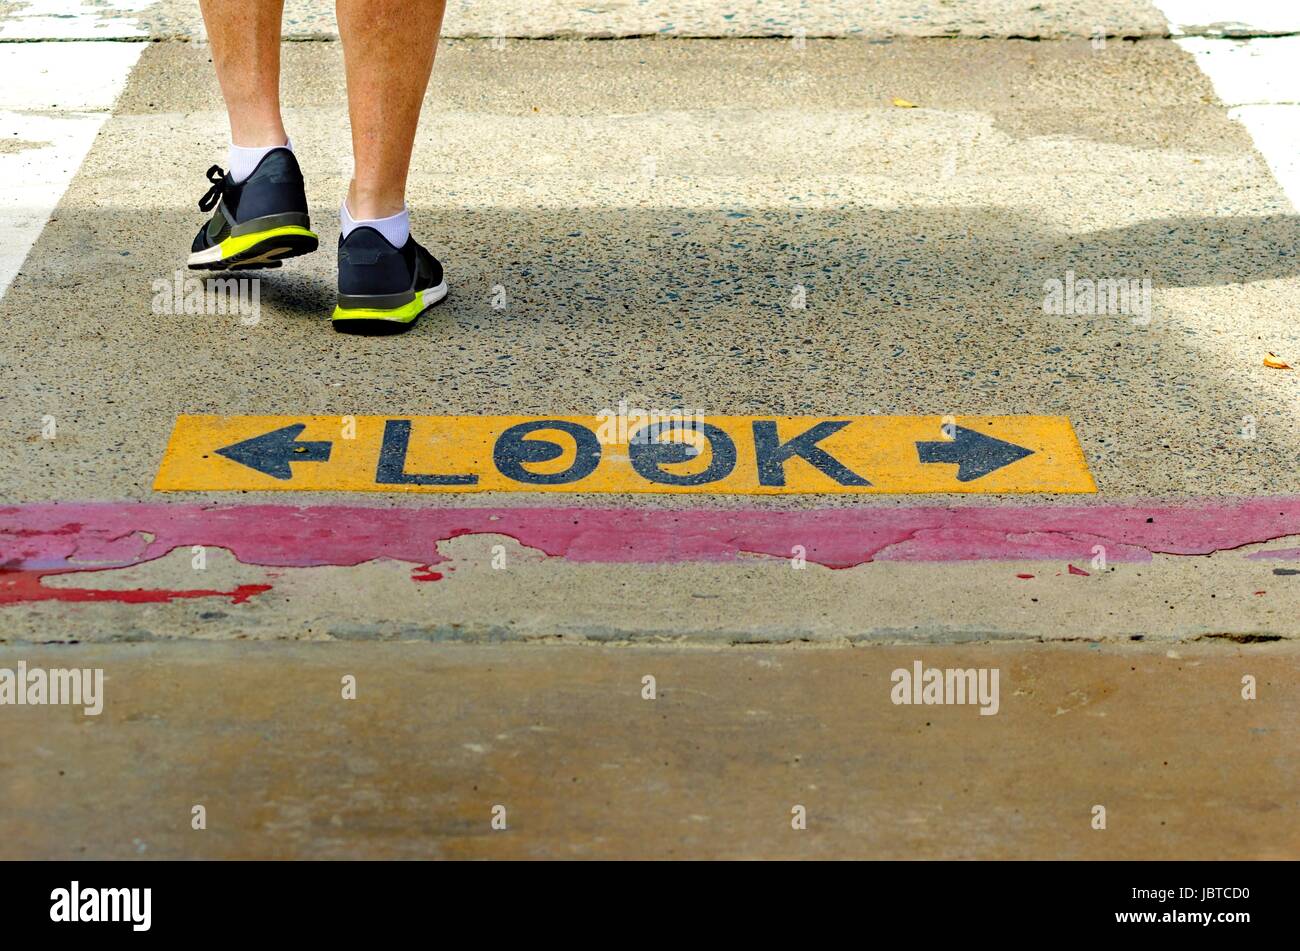 A black and yellow plastered look both ways sign on the road, with eyes drawn inside the o, which warns pedestrians to be careful of cars and bicycles at a crosswalk and a man crossing the street at an intersection. Stock Photo